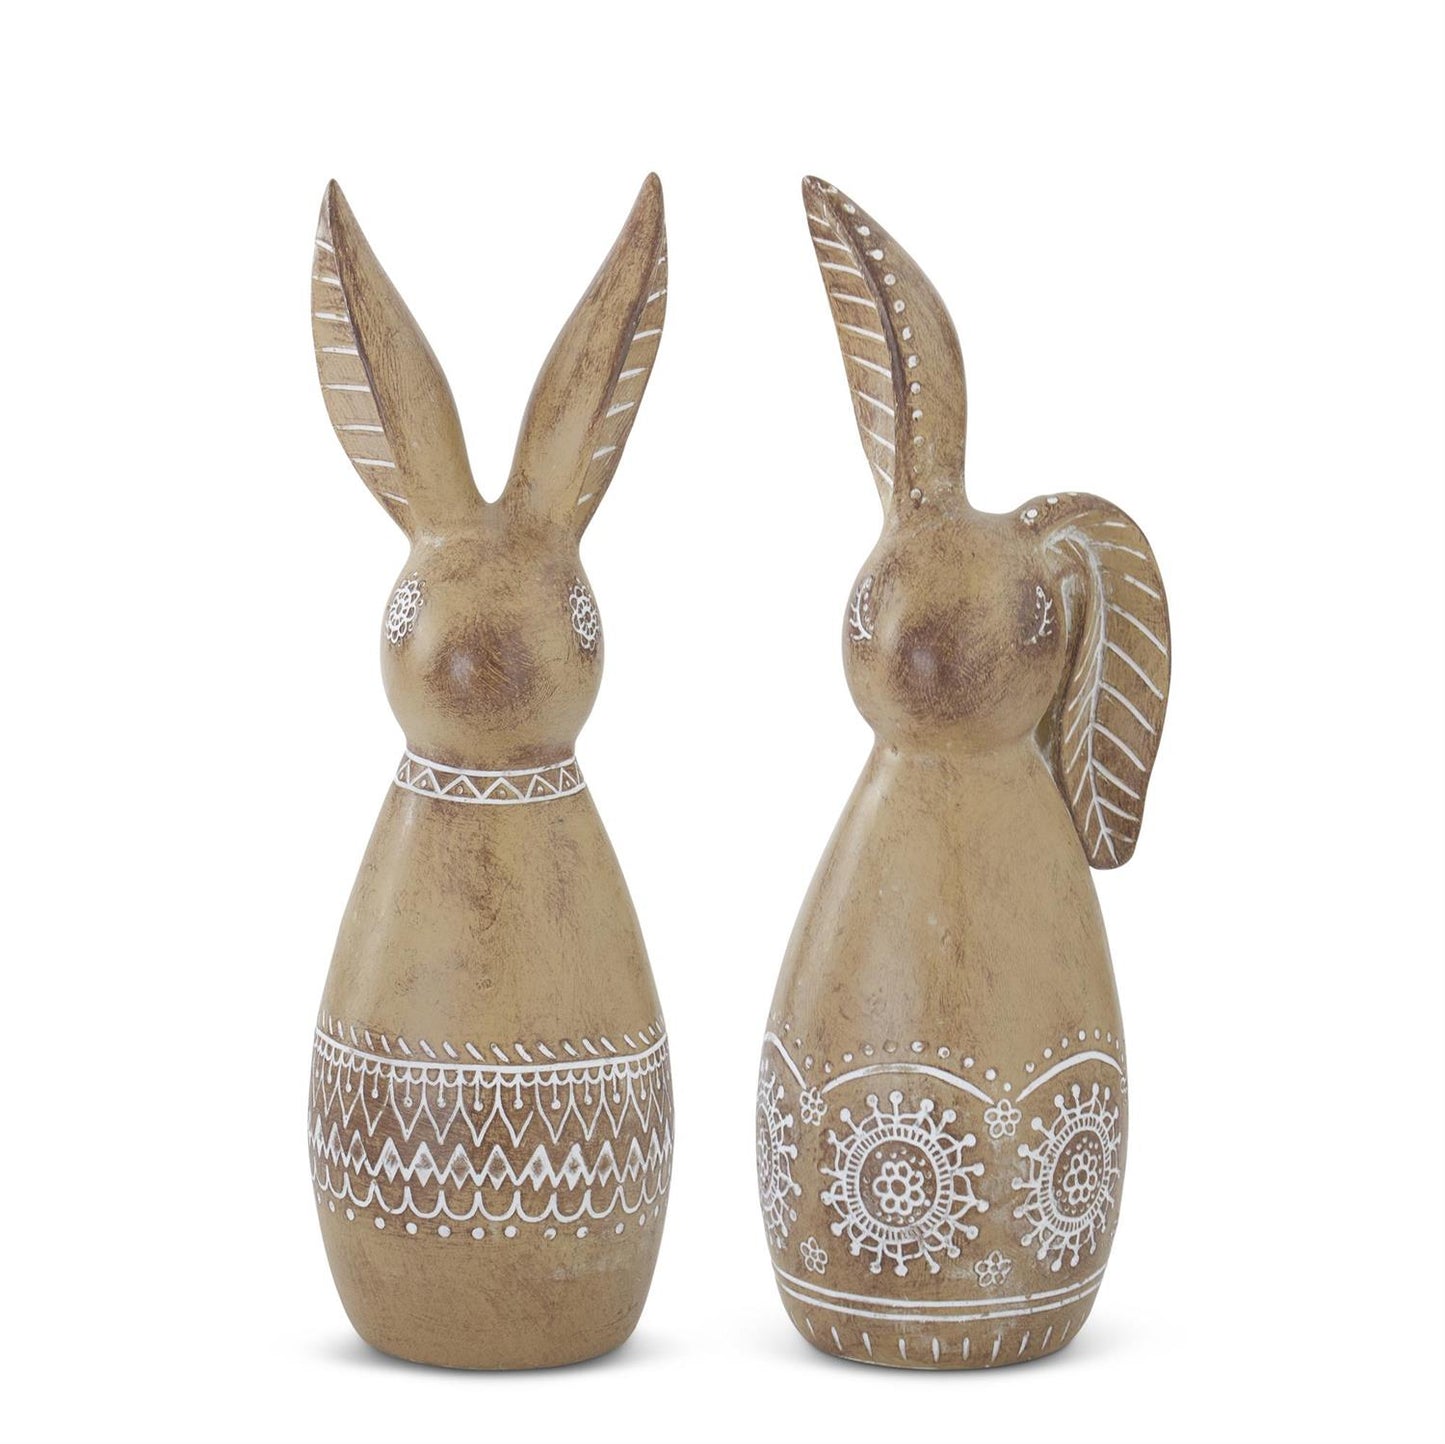 Tan Resin White Carved Bunny (2 styles)